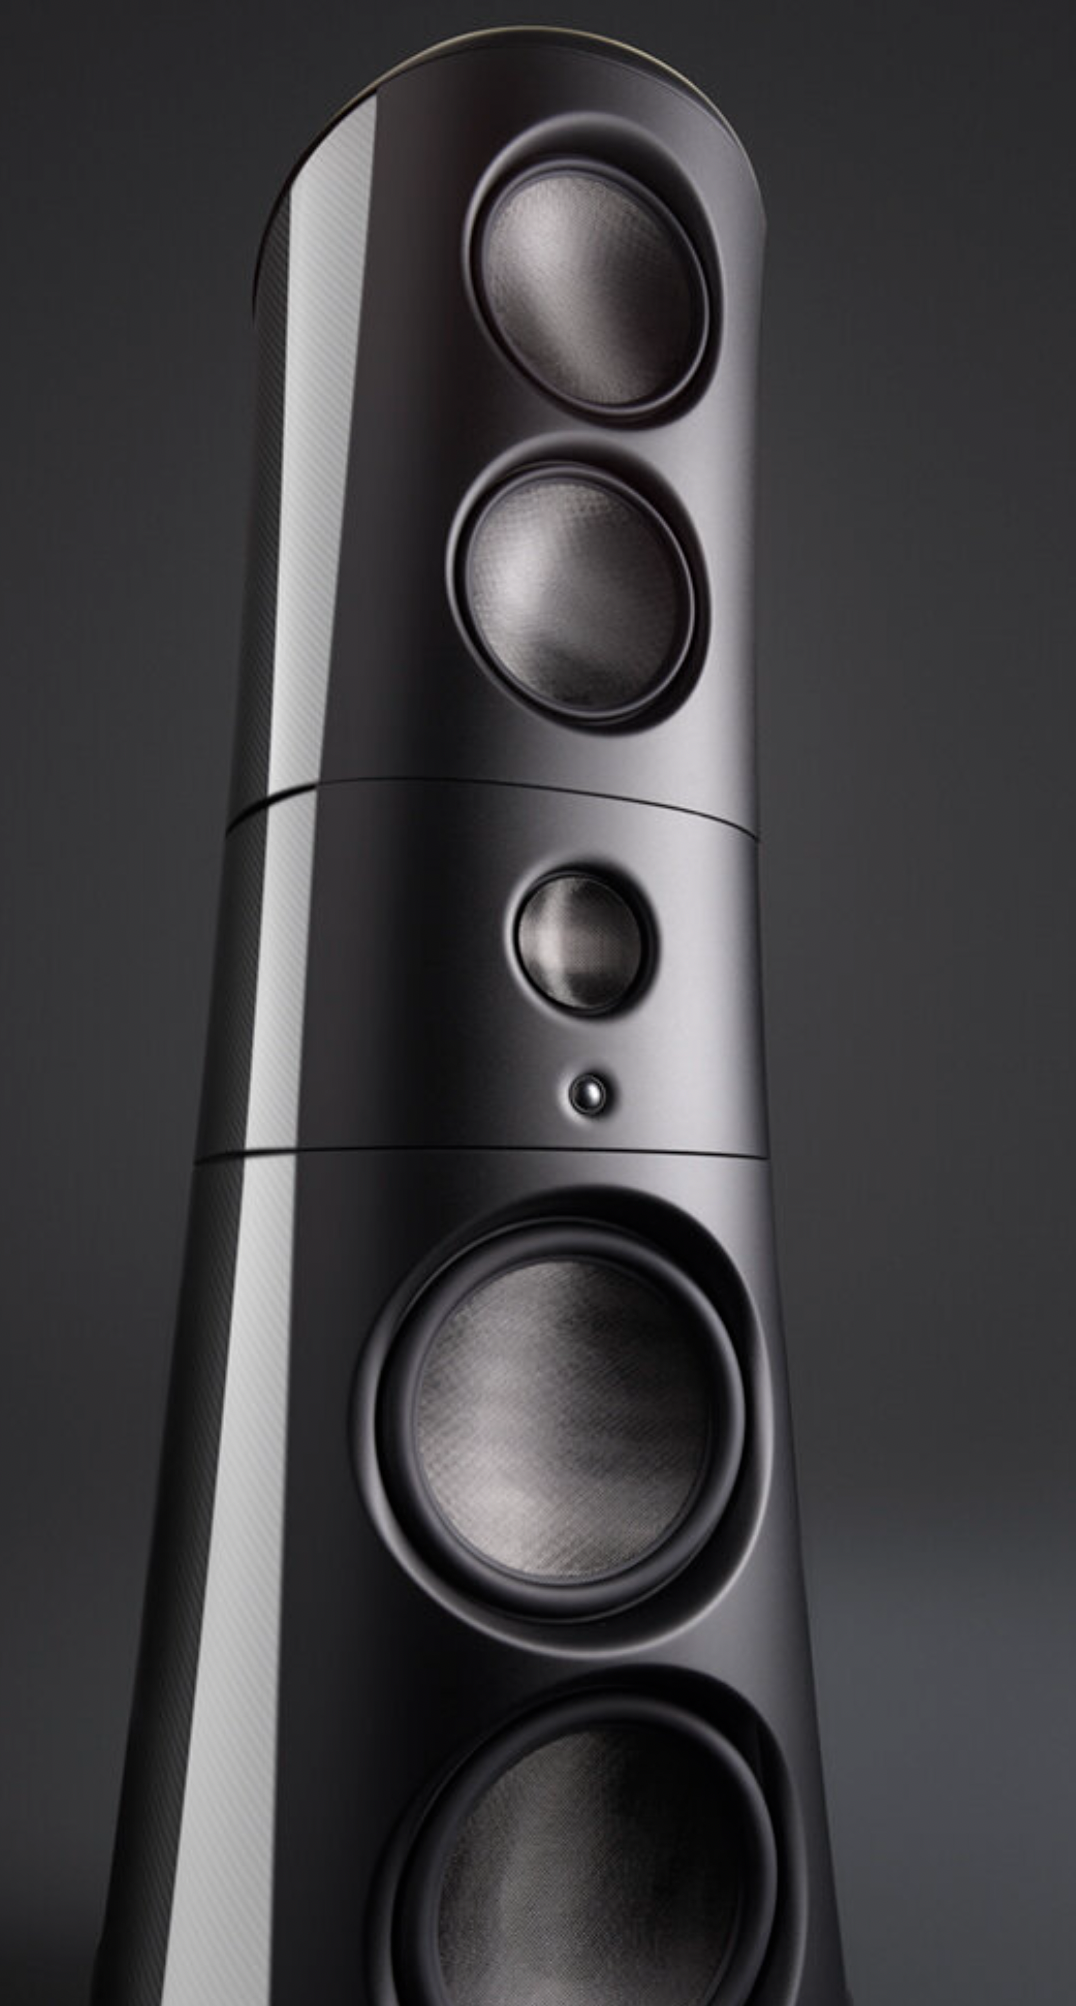 Magico M9 Is Among The World's Most Expensive Speakers